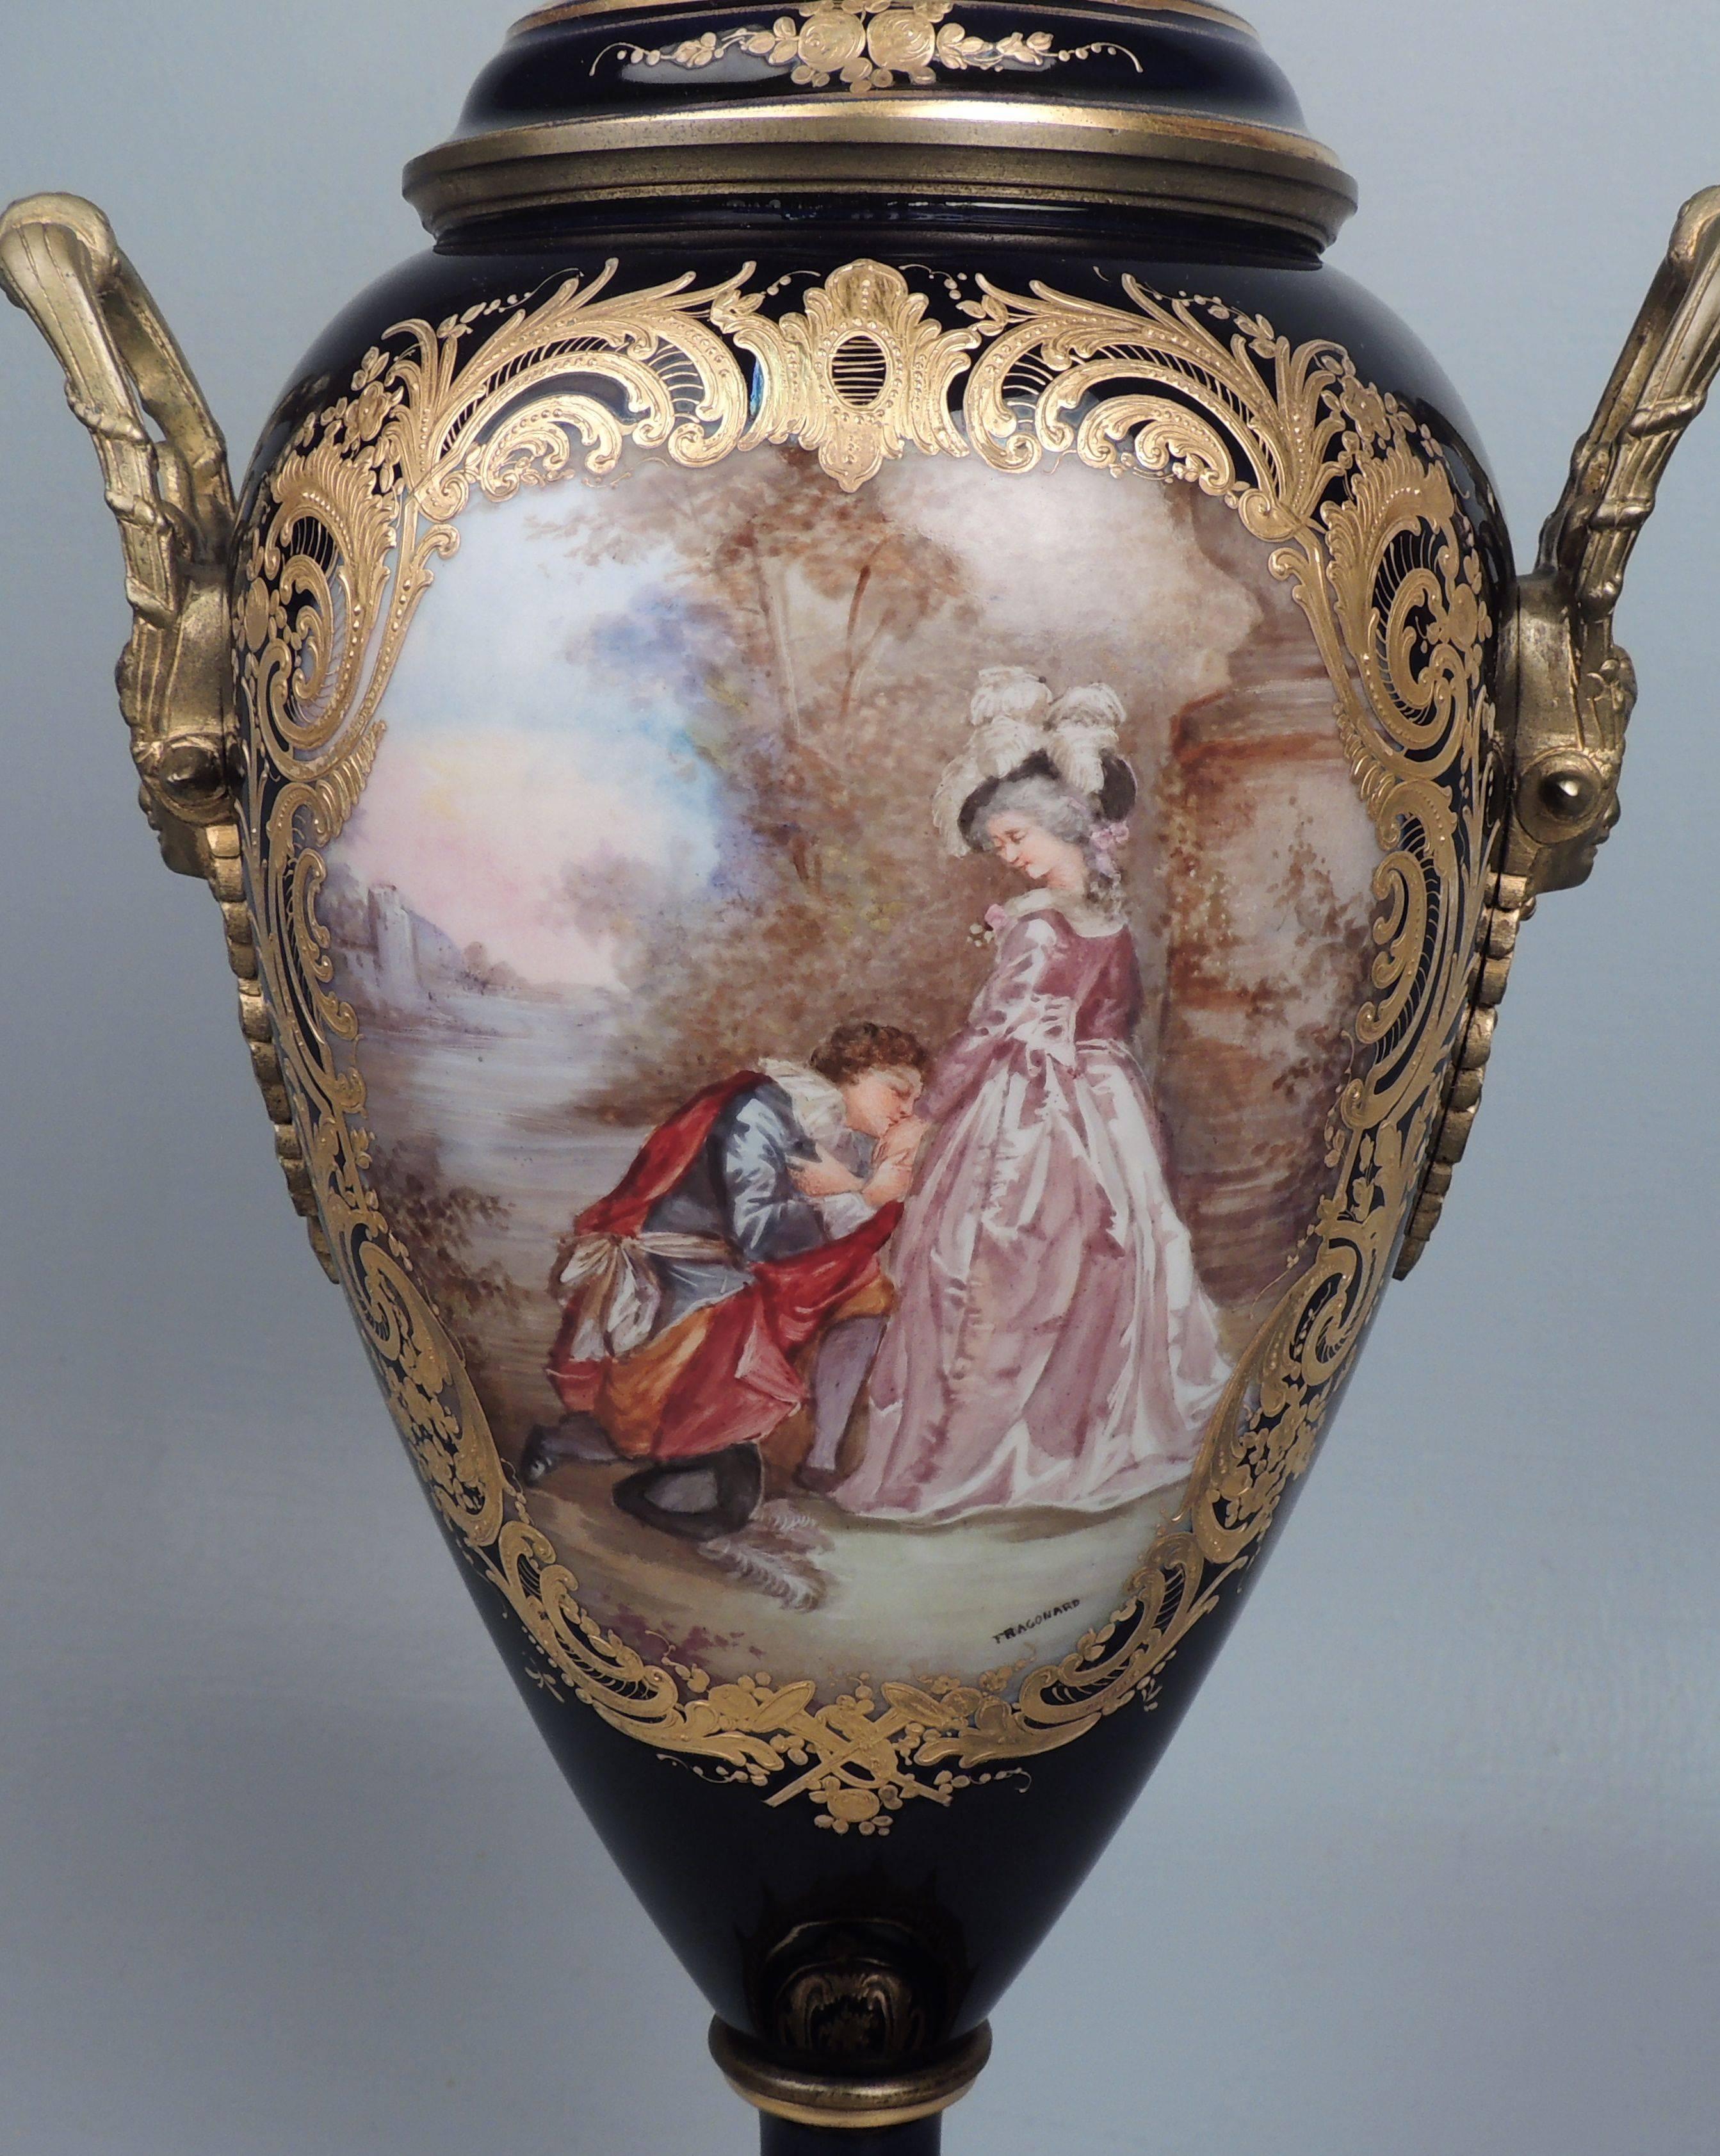 A good, large, Sevres-type, bronze mounted porcelain urn. 

Cobalt blue glazed and heavily gilded, the porcelain urn has two opposing hand-painted cartouches. The front cartouche bears a signature for Fragonard. 

The base and lid interior both